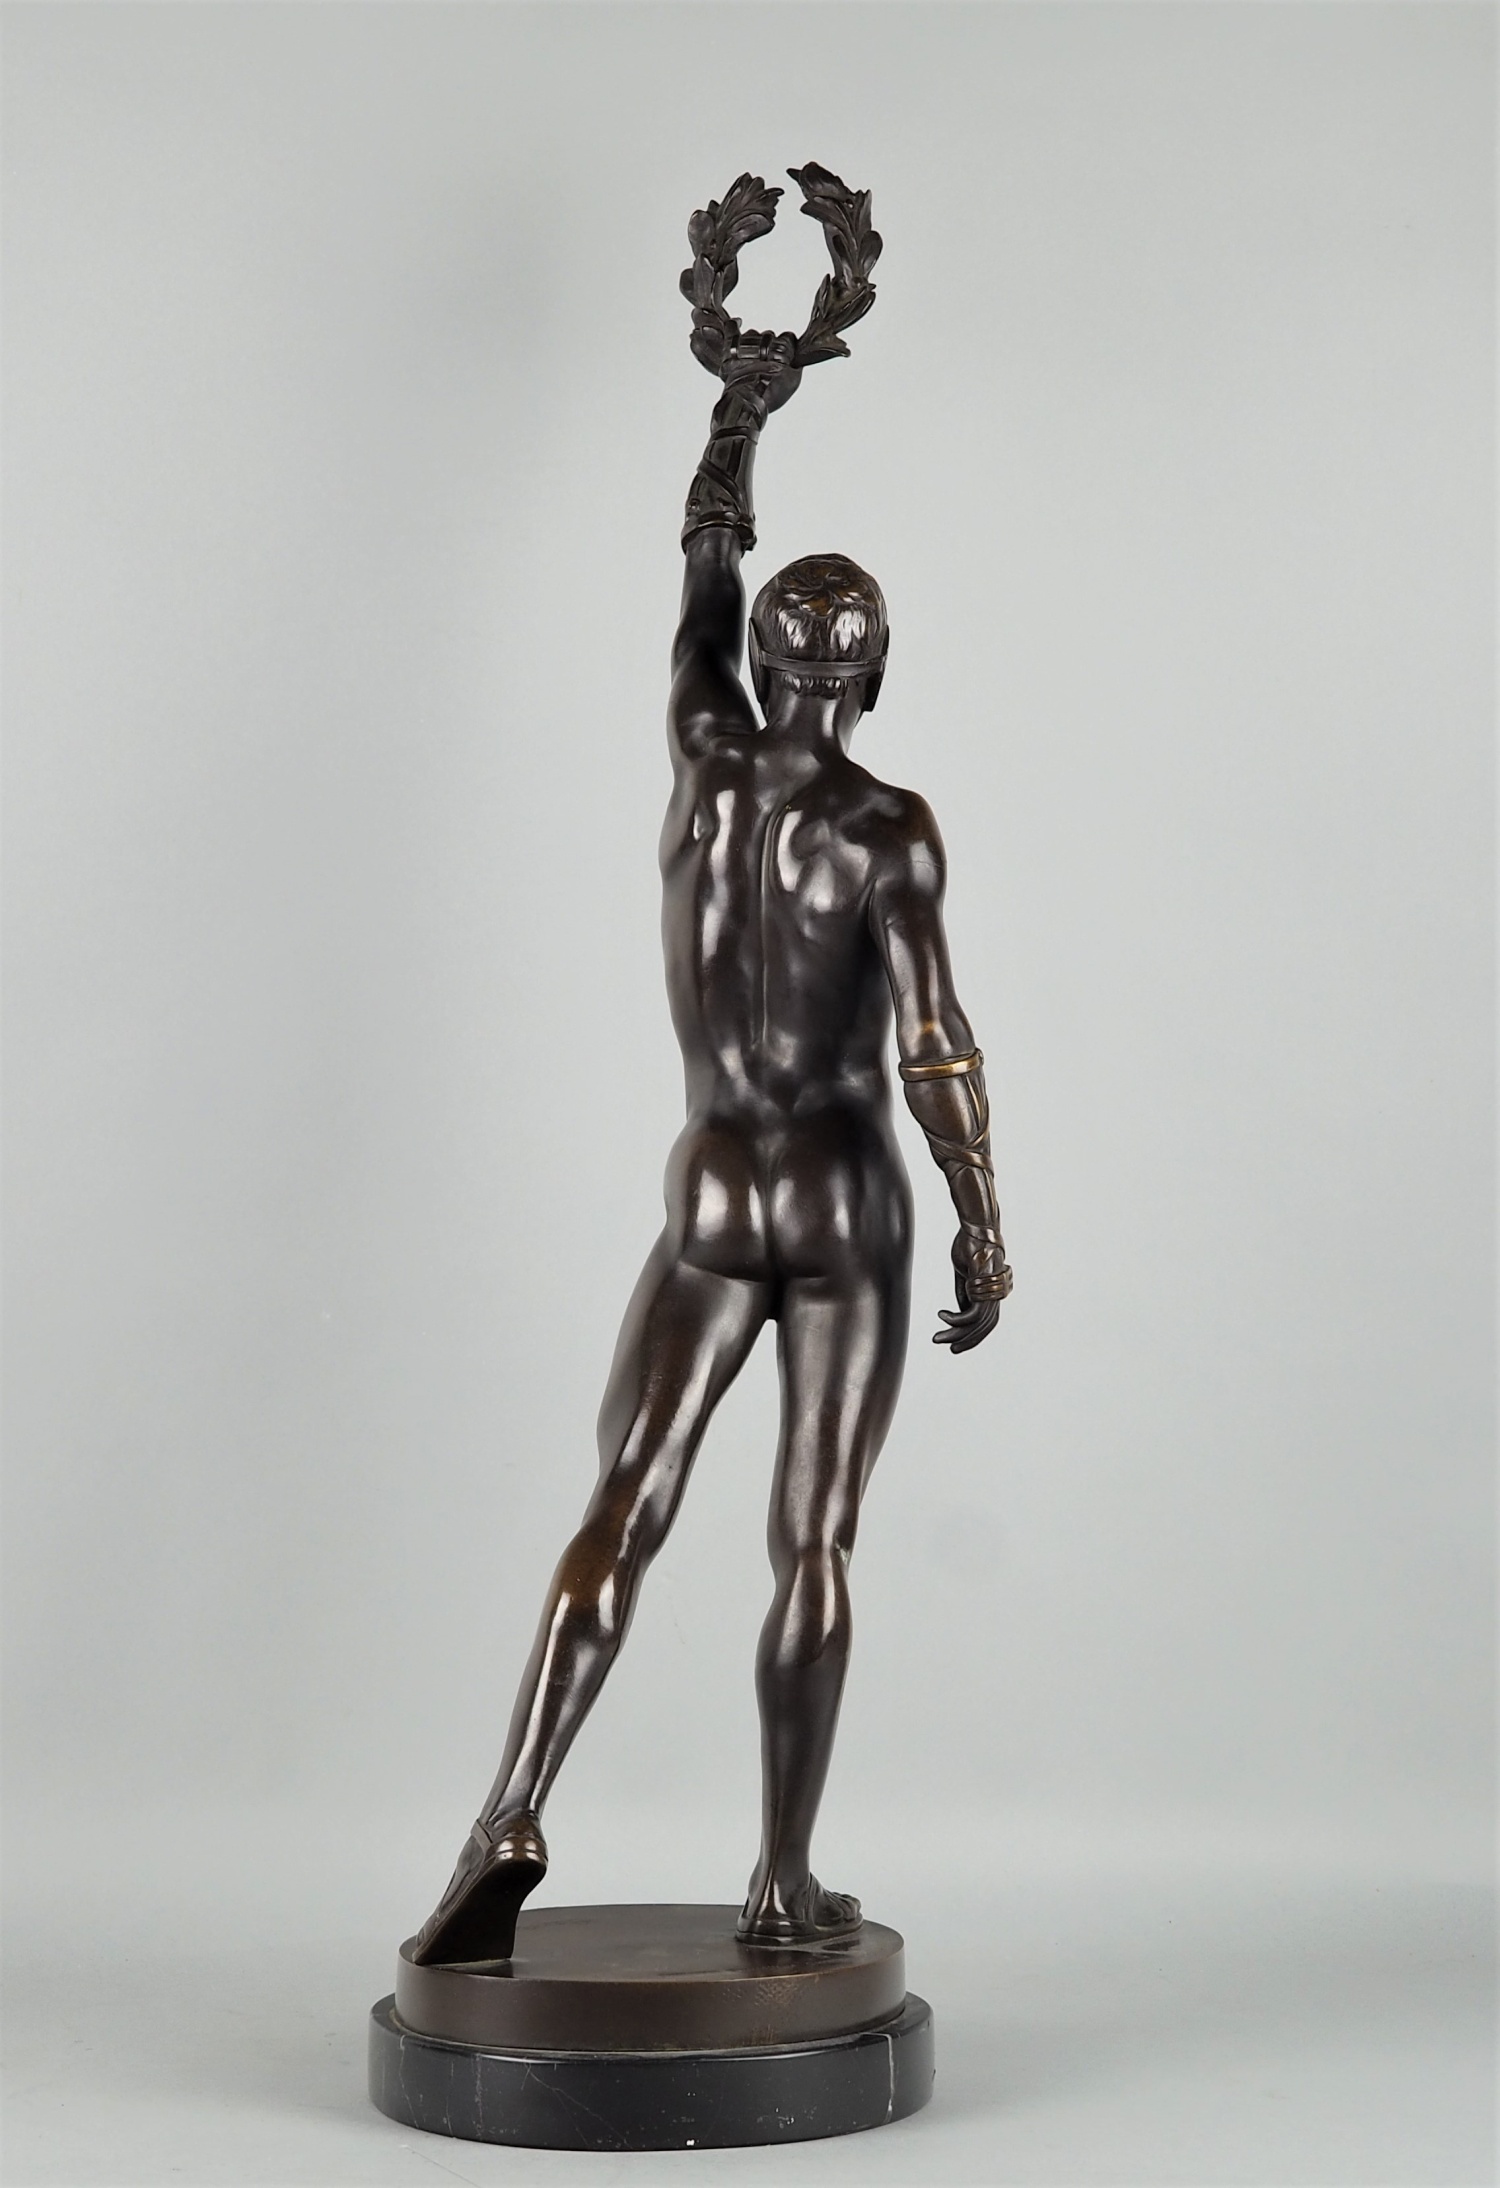 Large bronze of a victorious fist fighter by Heinrich Baucke around 1900, H. 66cm (26 in) - Image 2 of 5